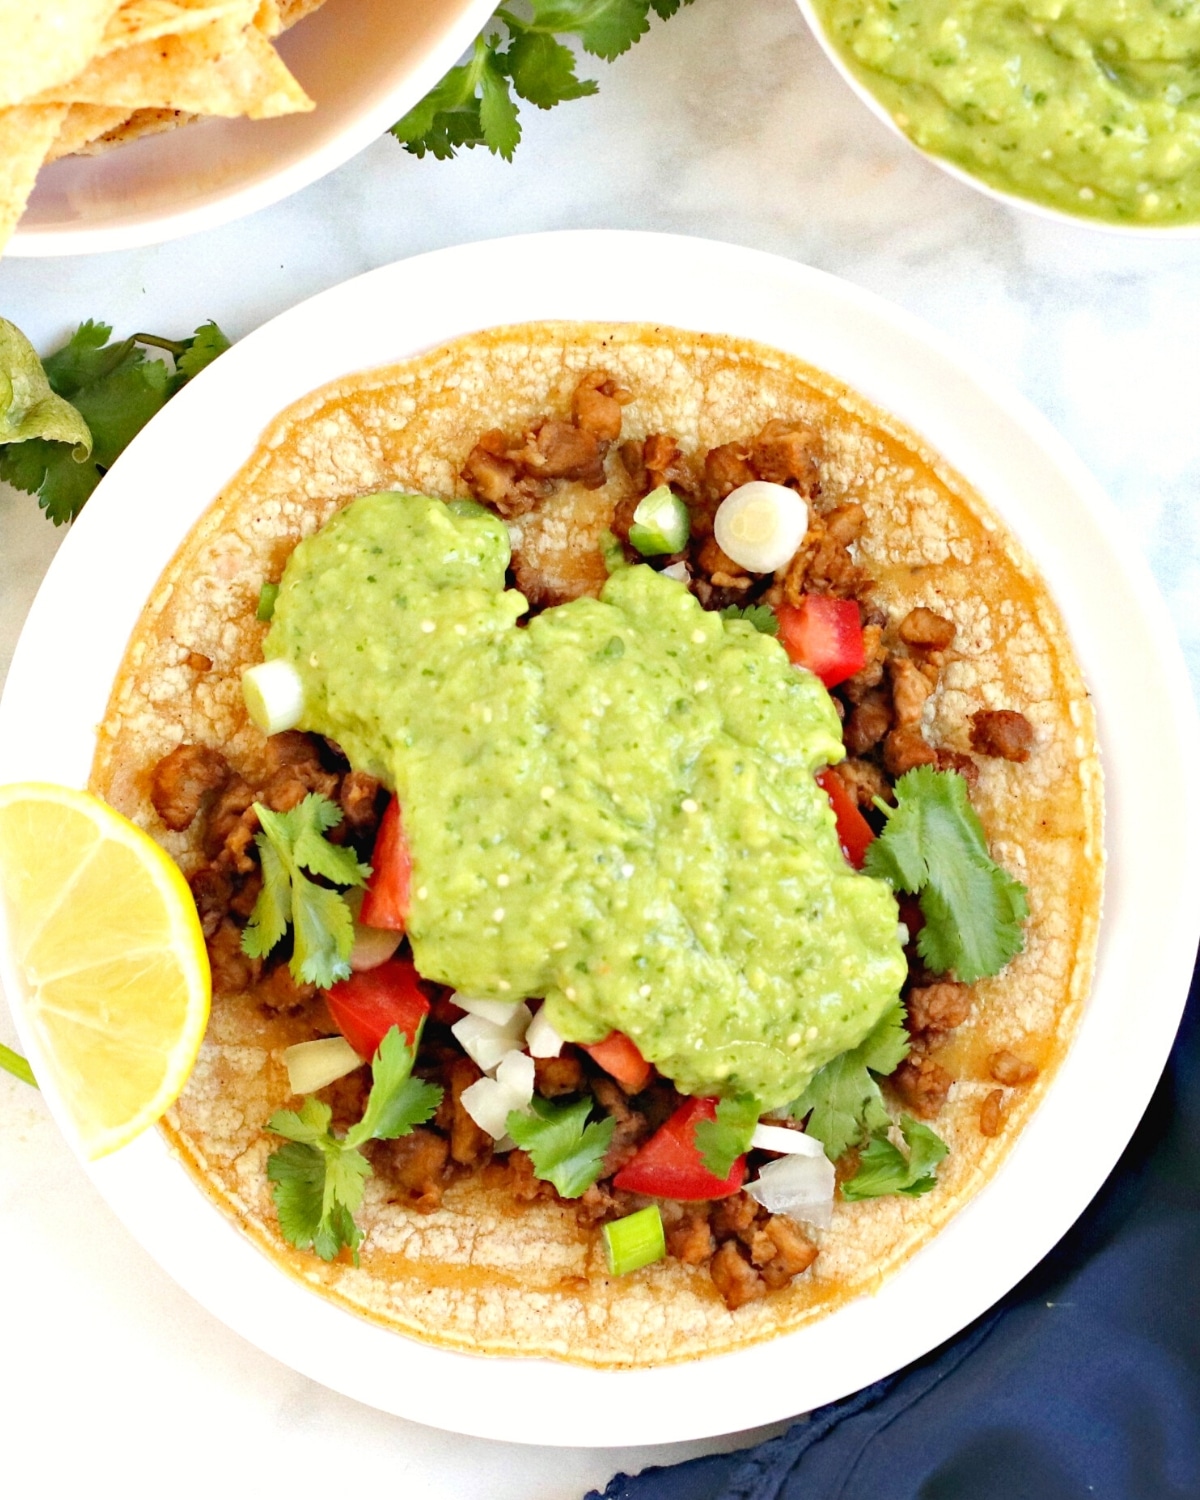 Taco topped with salsa verde.